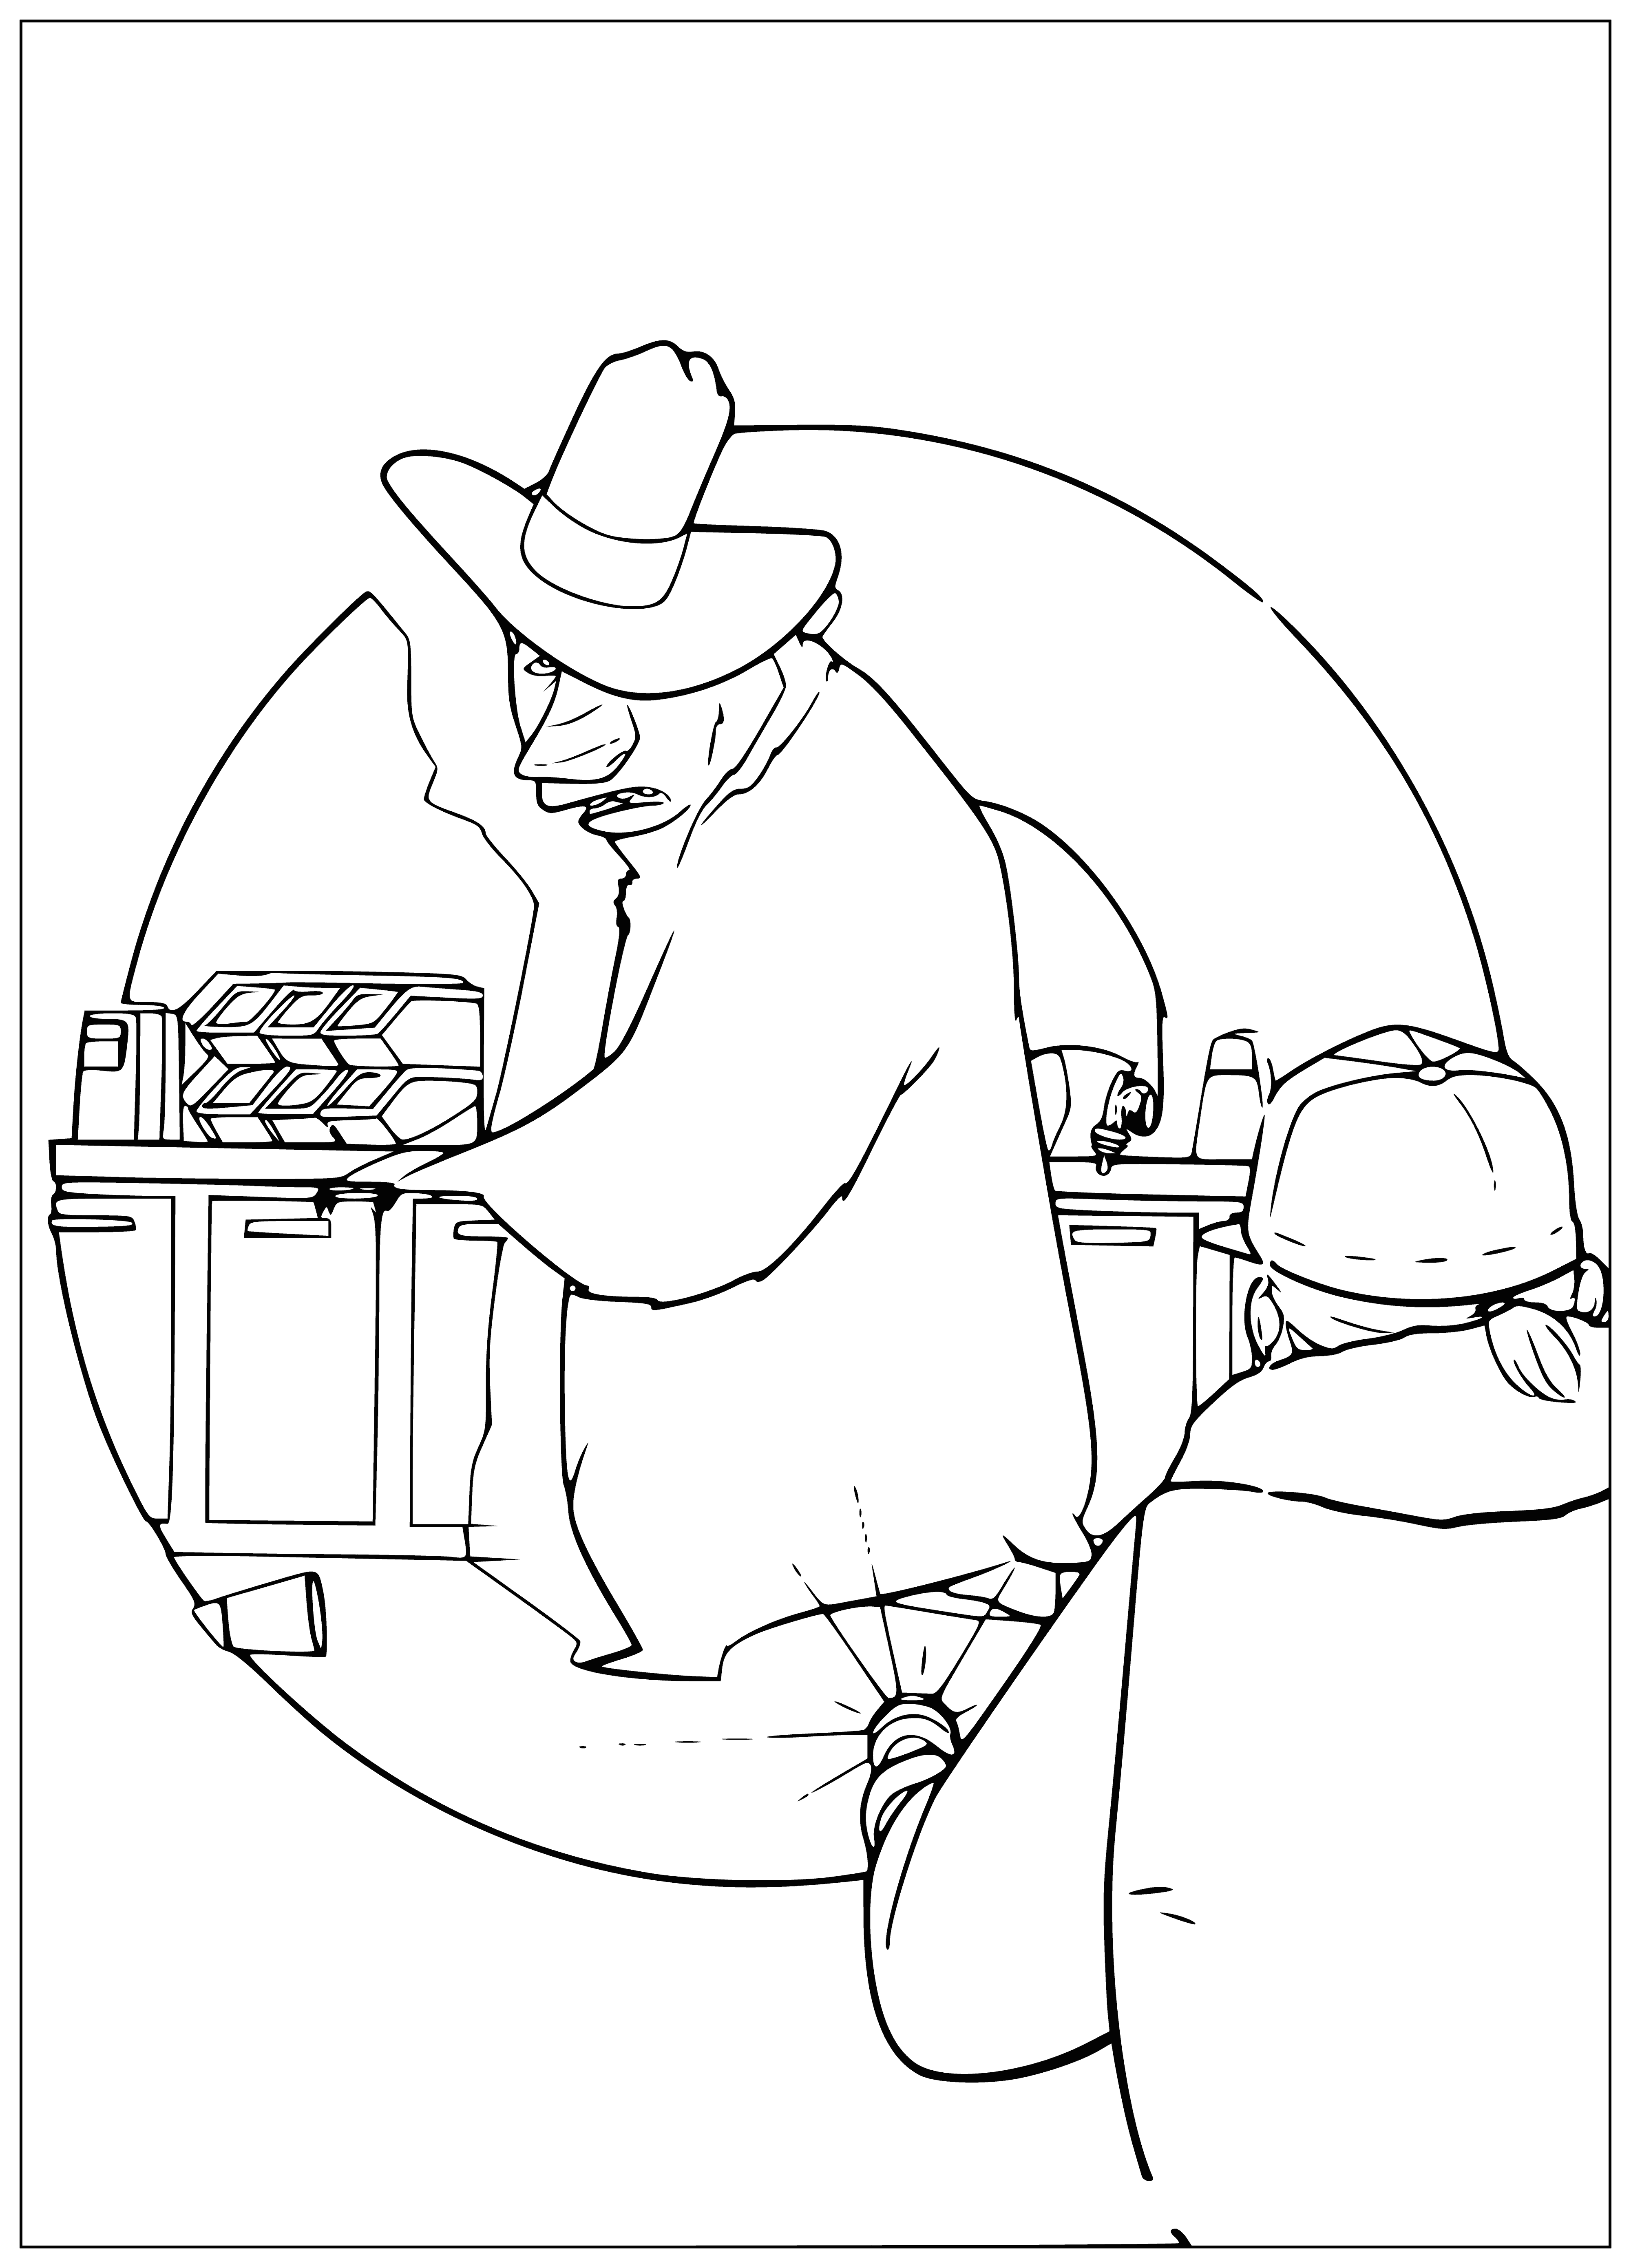 coloring page: Coloring page of sheriff's badge w/words "Open Season - Sheriff" plus checkered border.